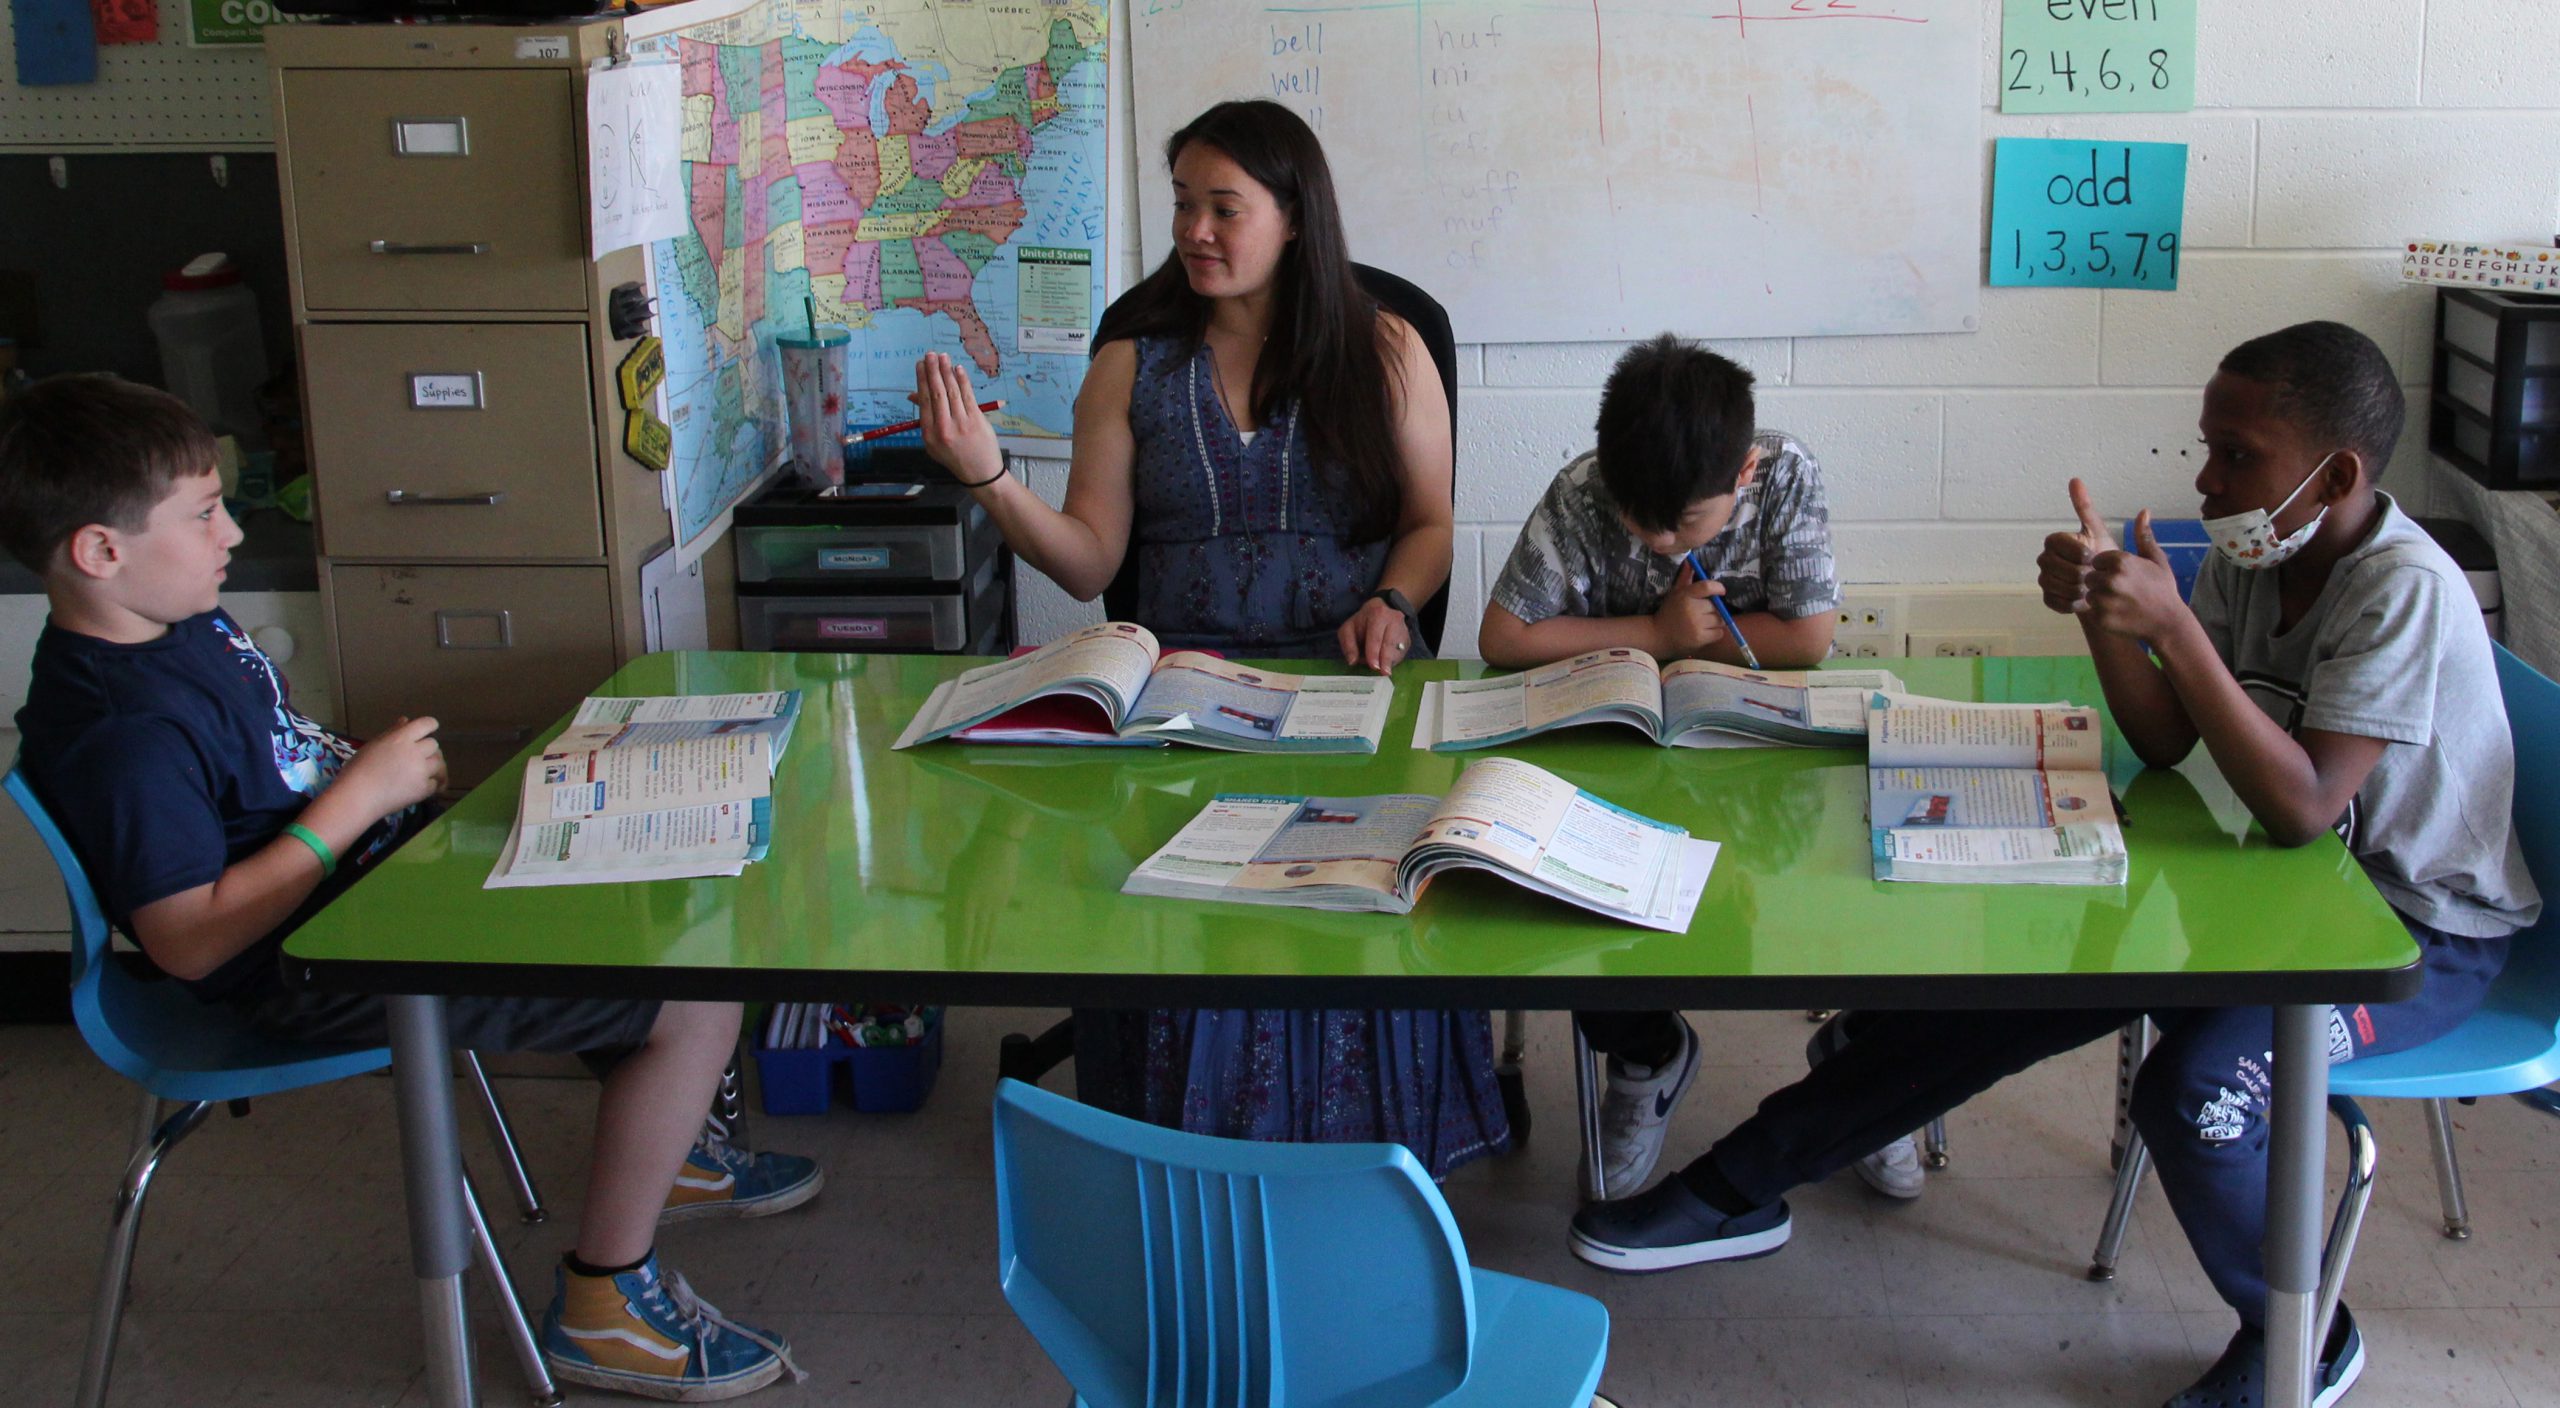 A teacher is sitting at a table with 3 students. Textbooks are open in front of everyone and the teacher is engaging in conversation with the student on her left.